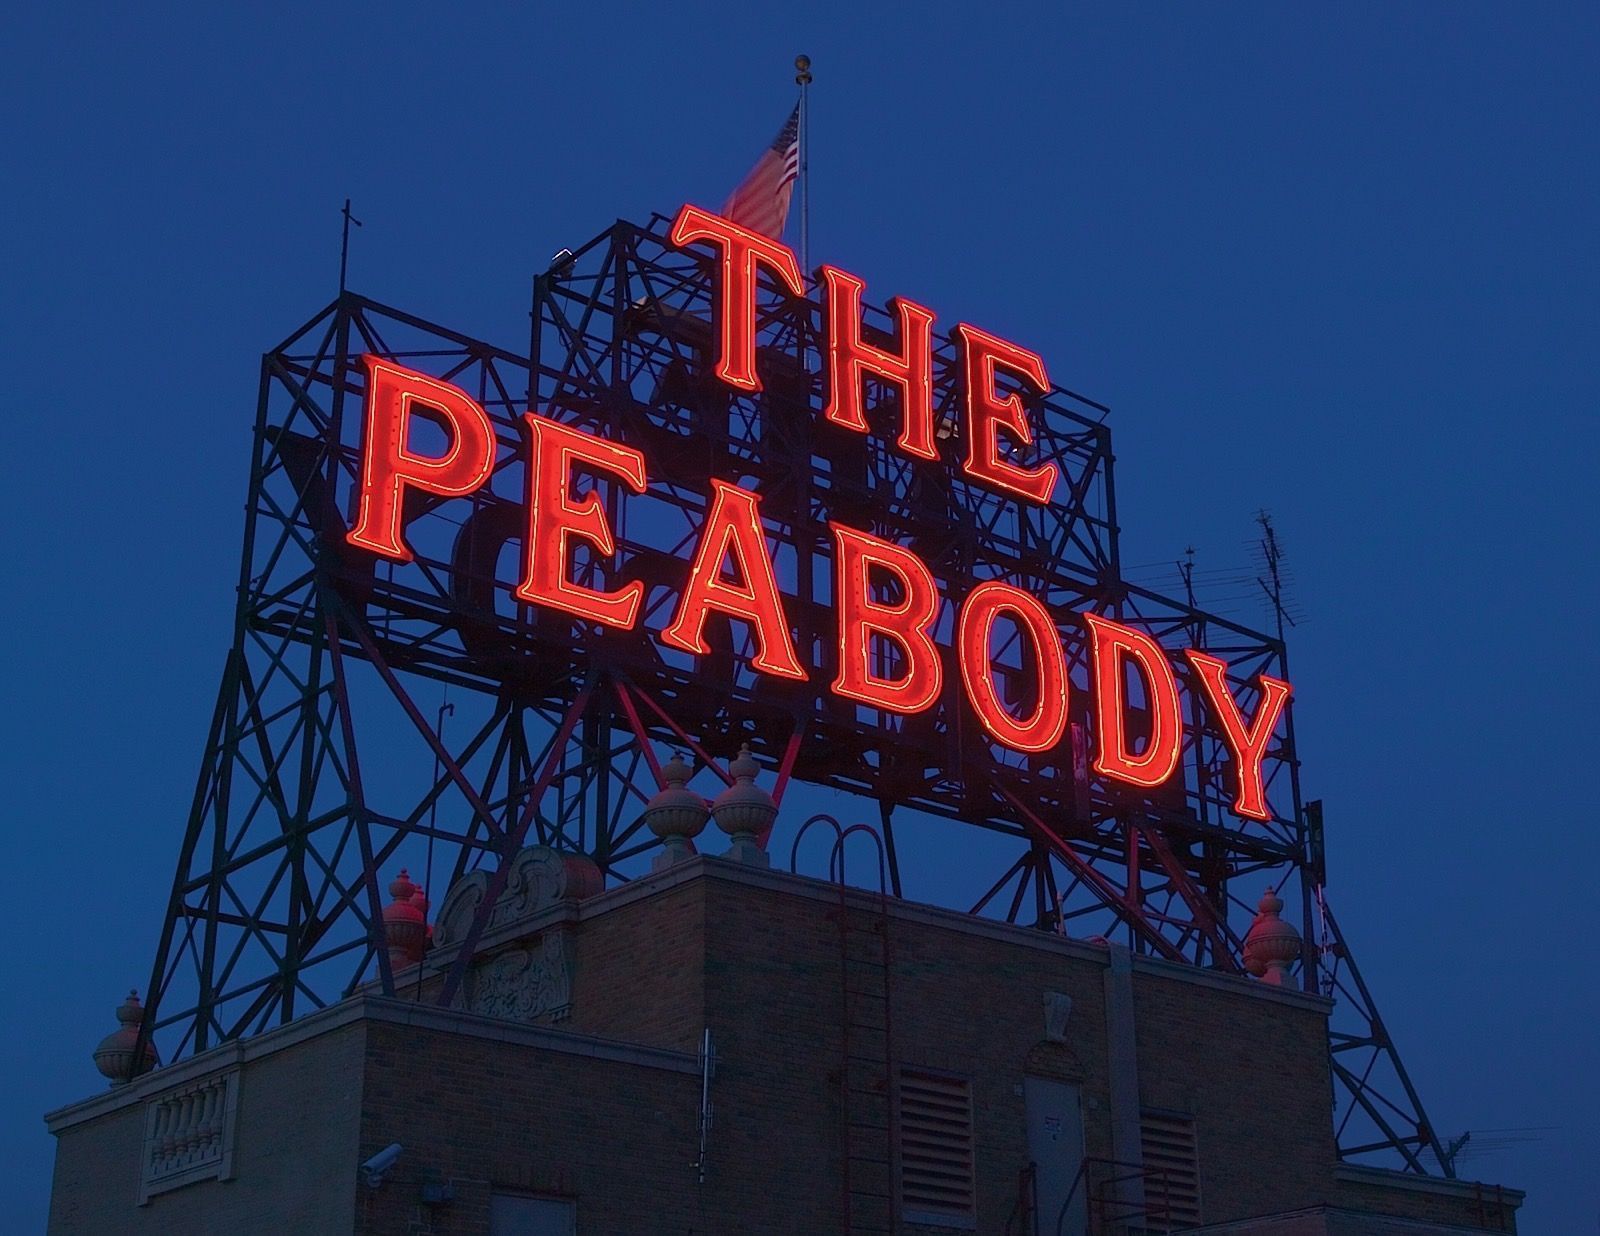 The Peabody Memphis exterior sign at The Peabody Memphis